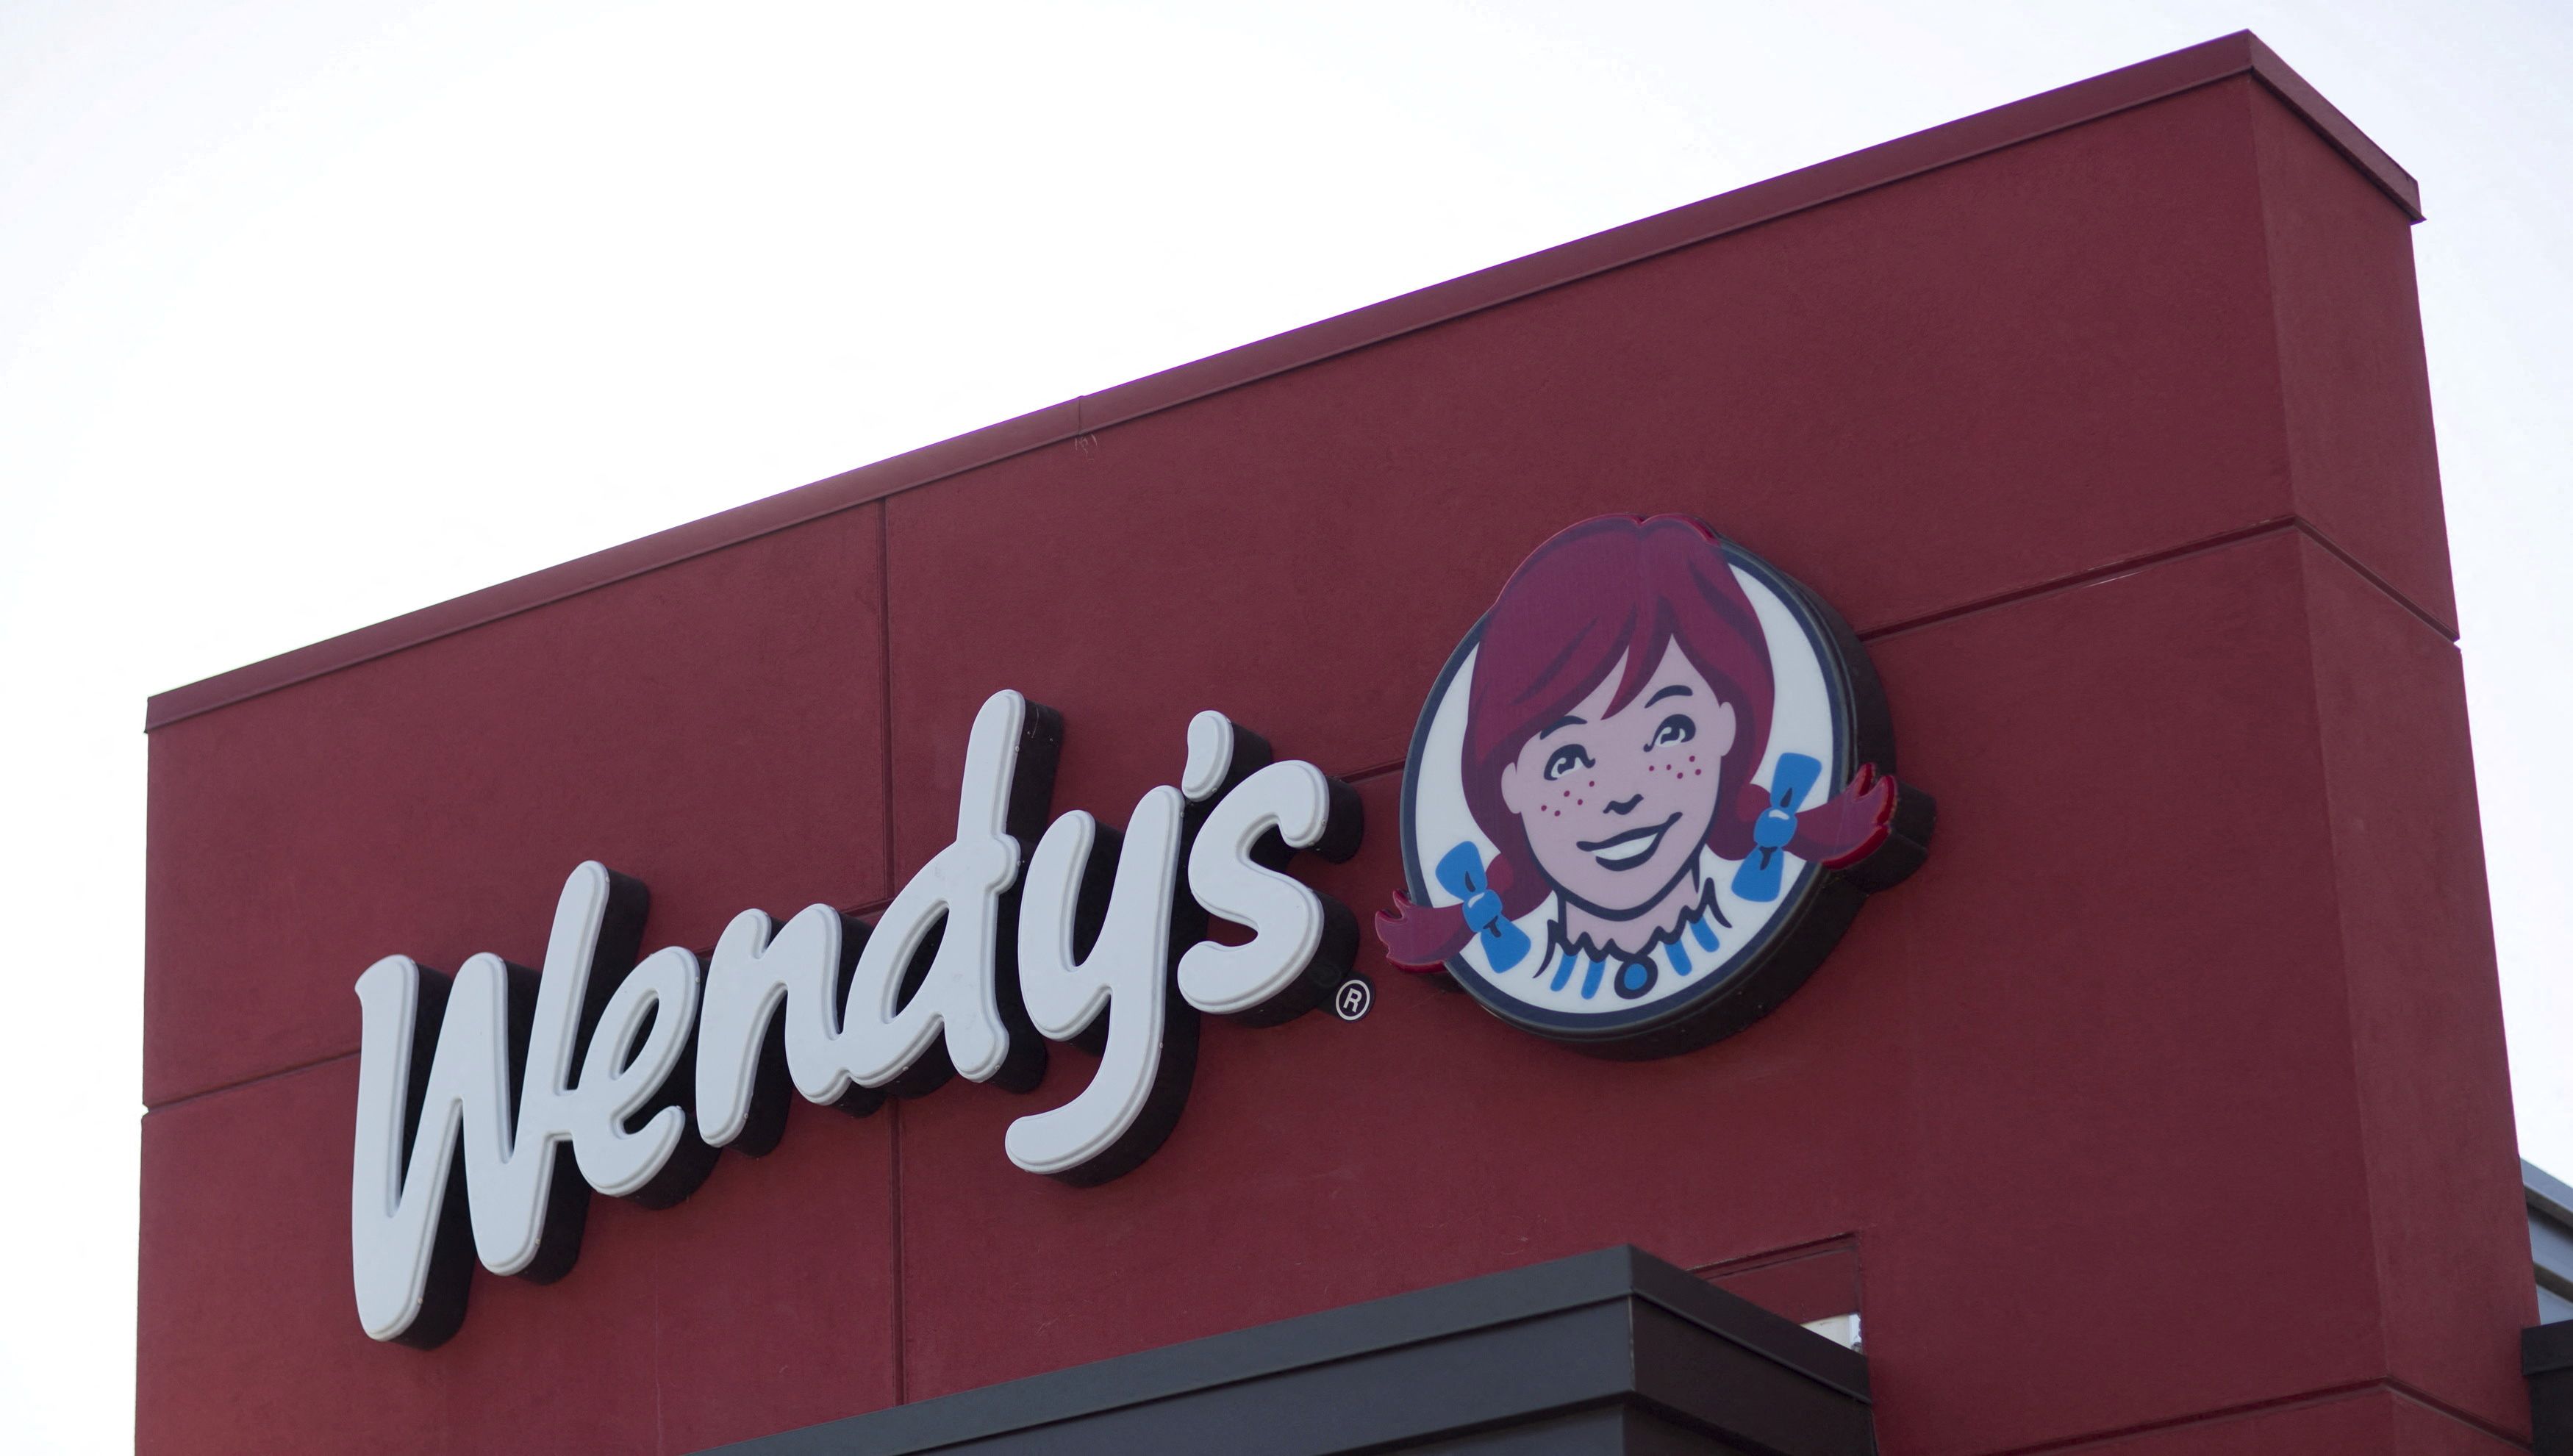 A Wendy's Co restaurant is pictured in Monrovia